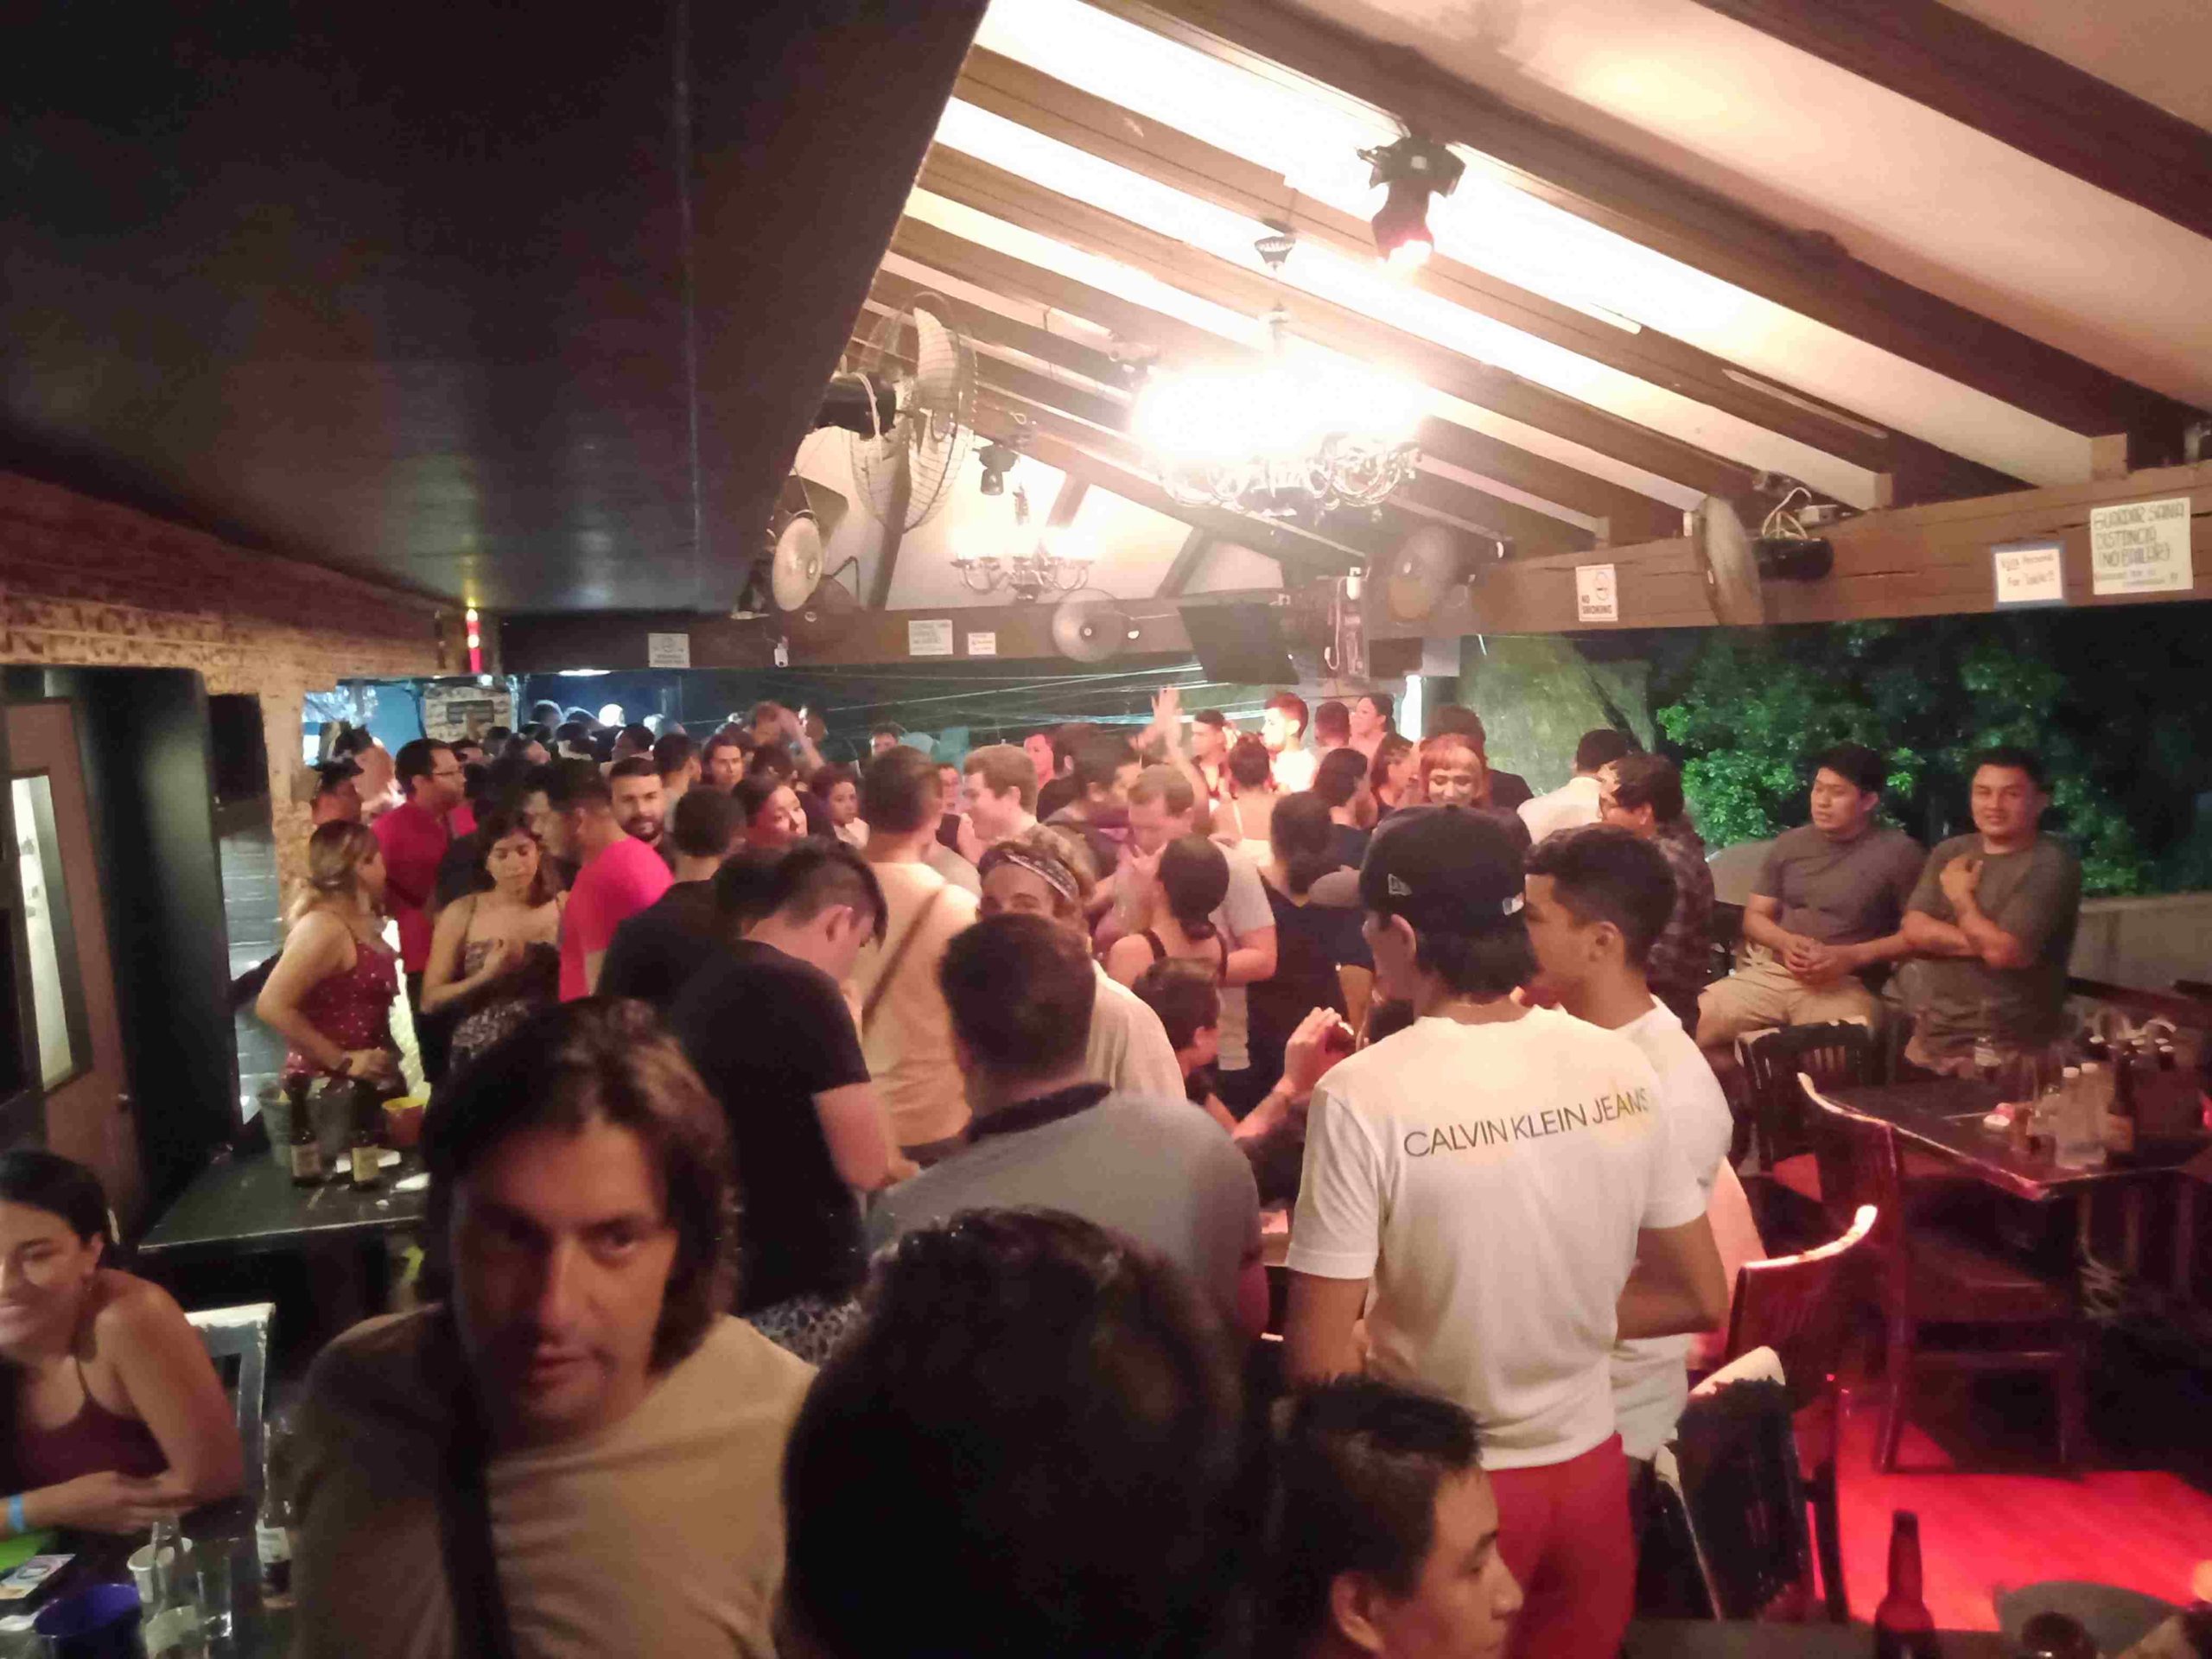 Nightlife in Playa, around 40% of the bars and discos are open